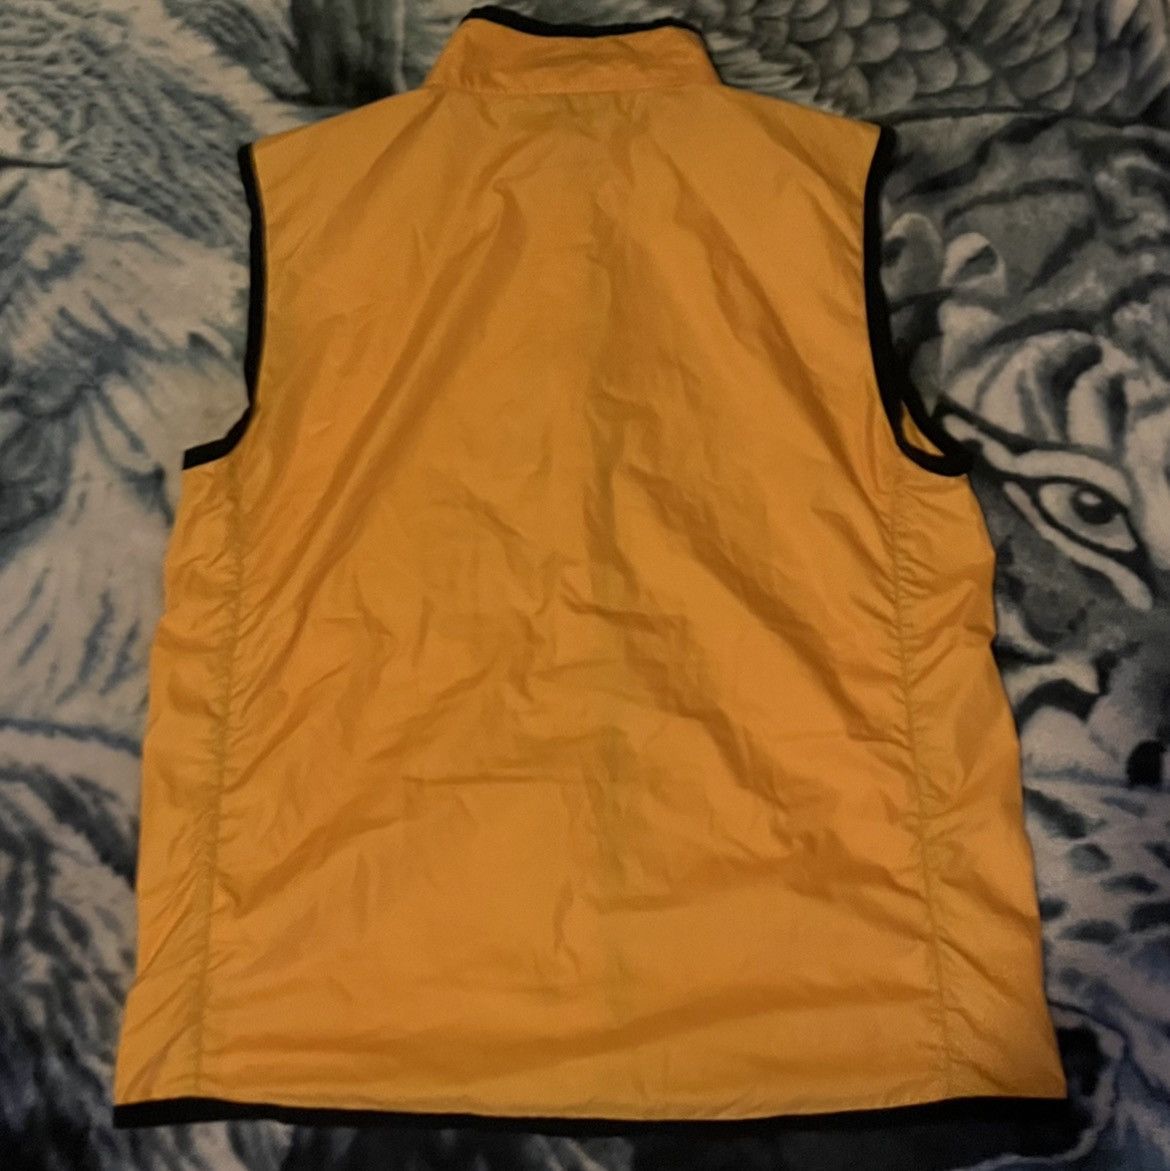 Nike Nike zip up vest Size US M / EU 48-50 / 2 - 2 Preview